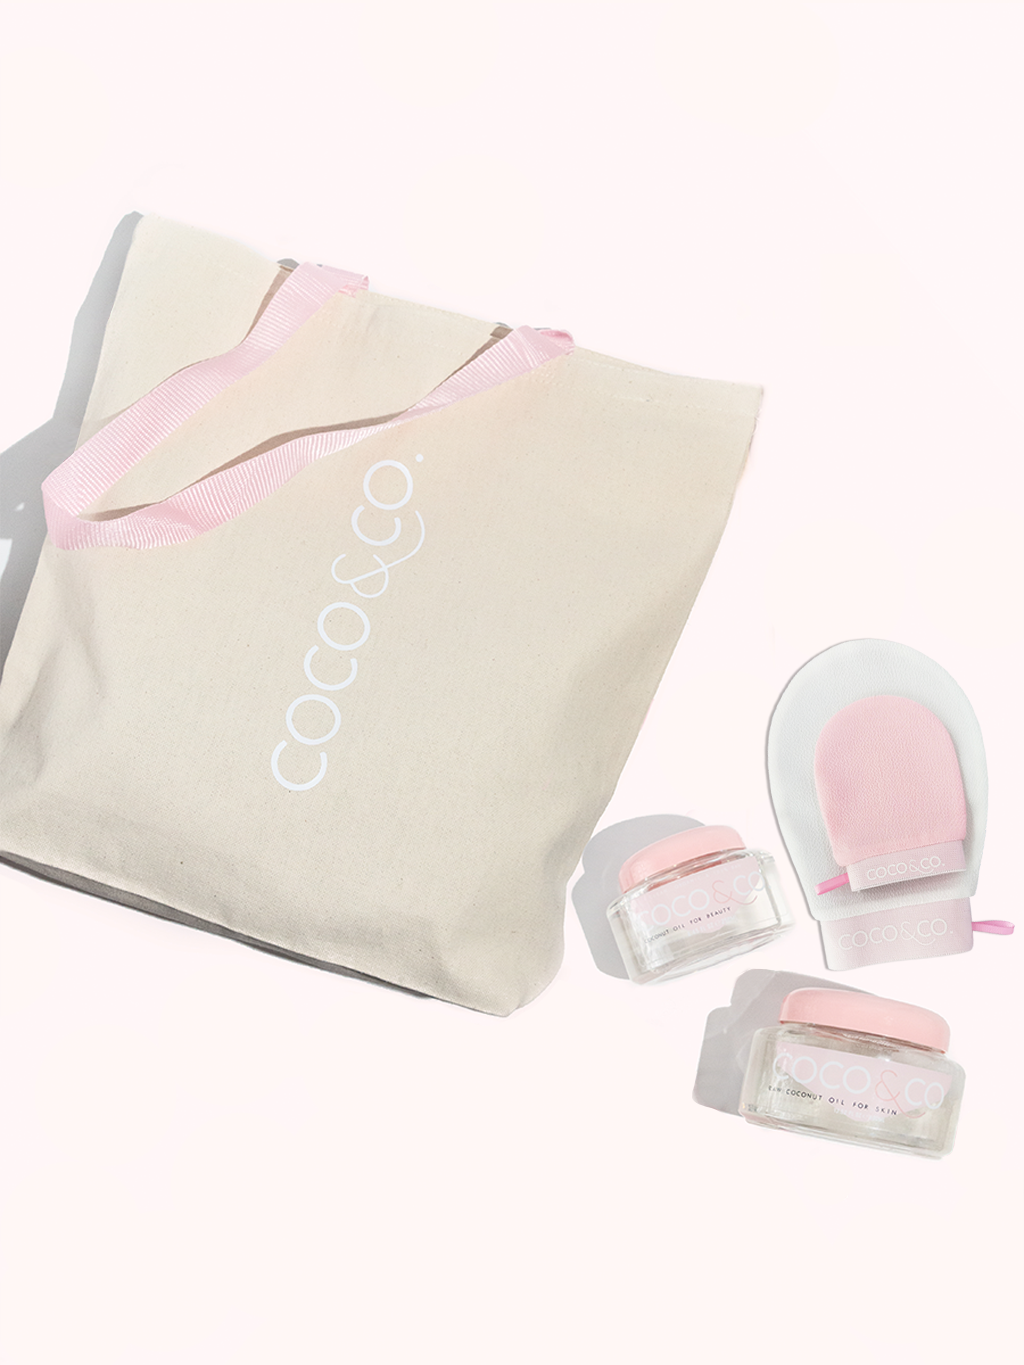 Raw Duos Fling Set - COCO & CO. Beauty